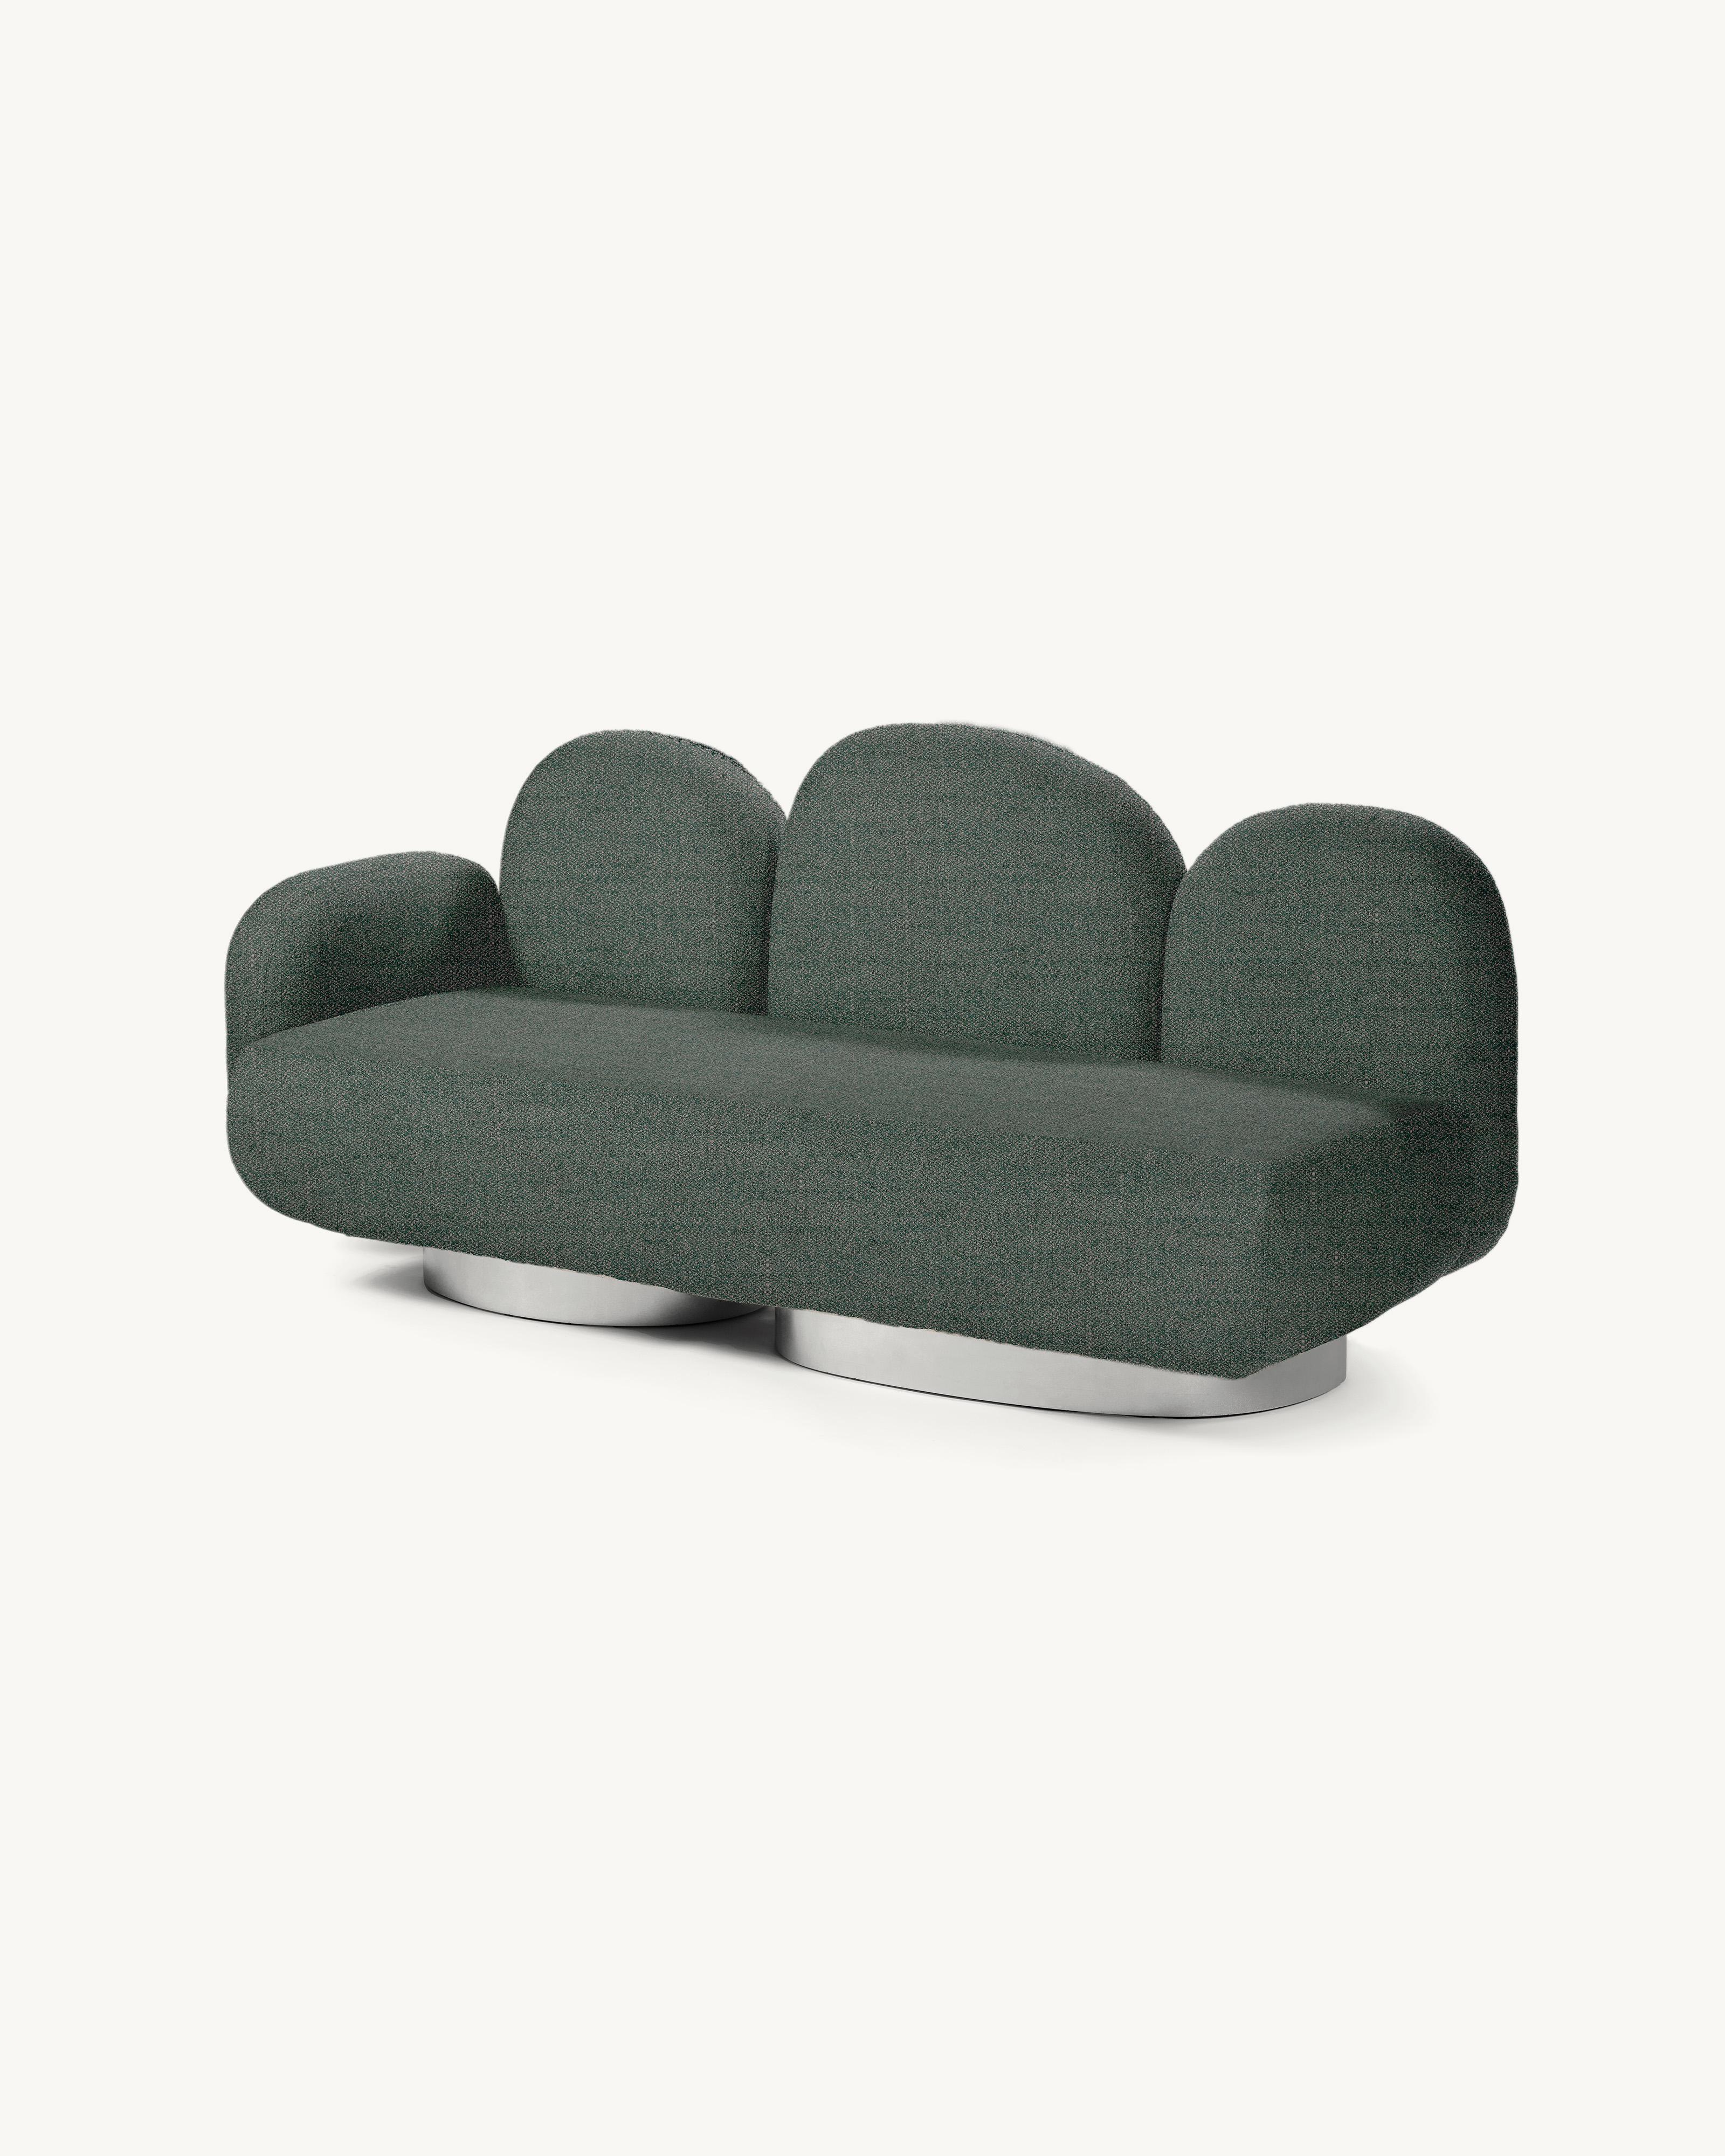 Belgian Contemporary Sofa 'Assemble' by Destroyers/Builders, 2 seaters + 1 armrest For Sale